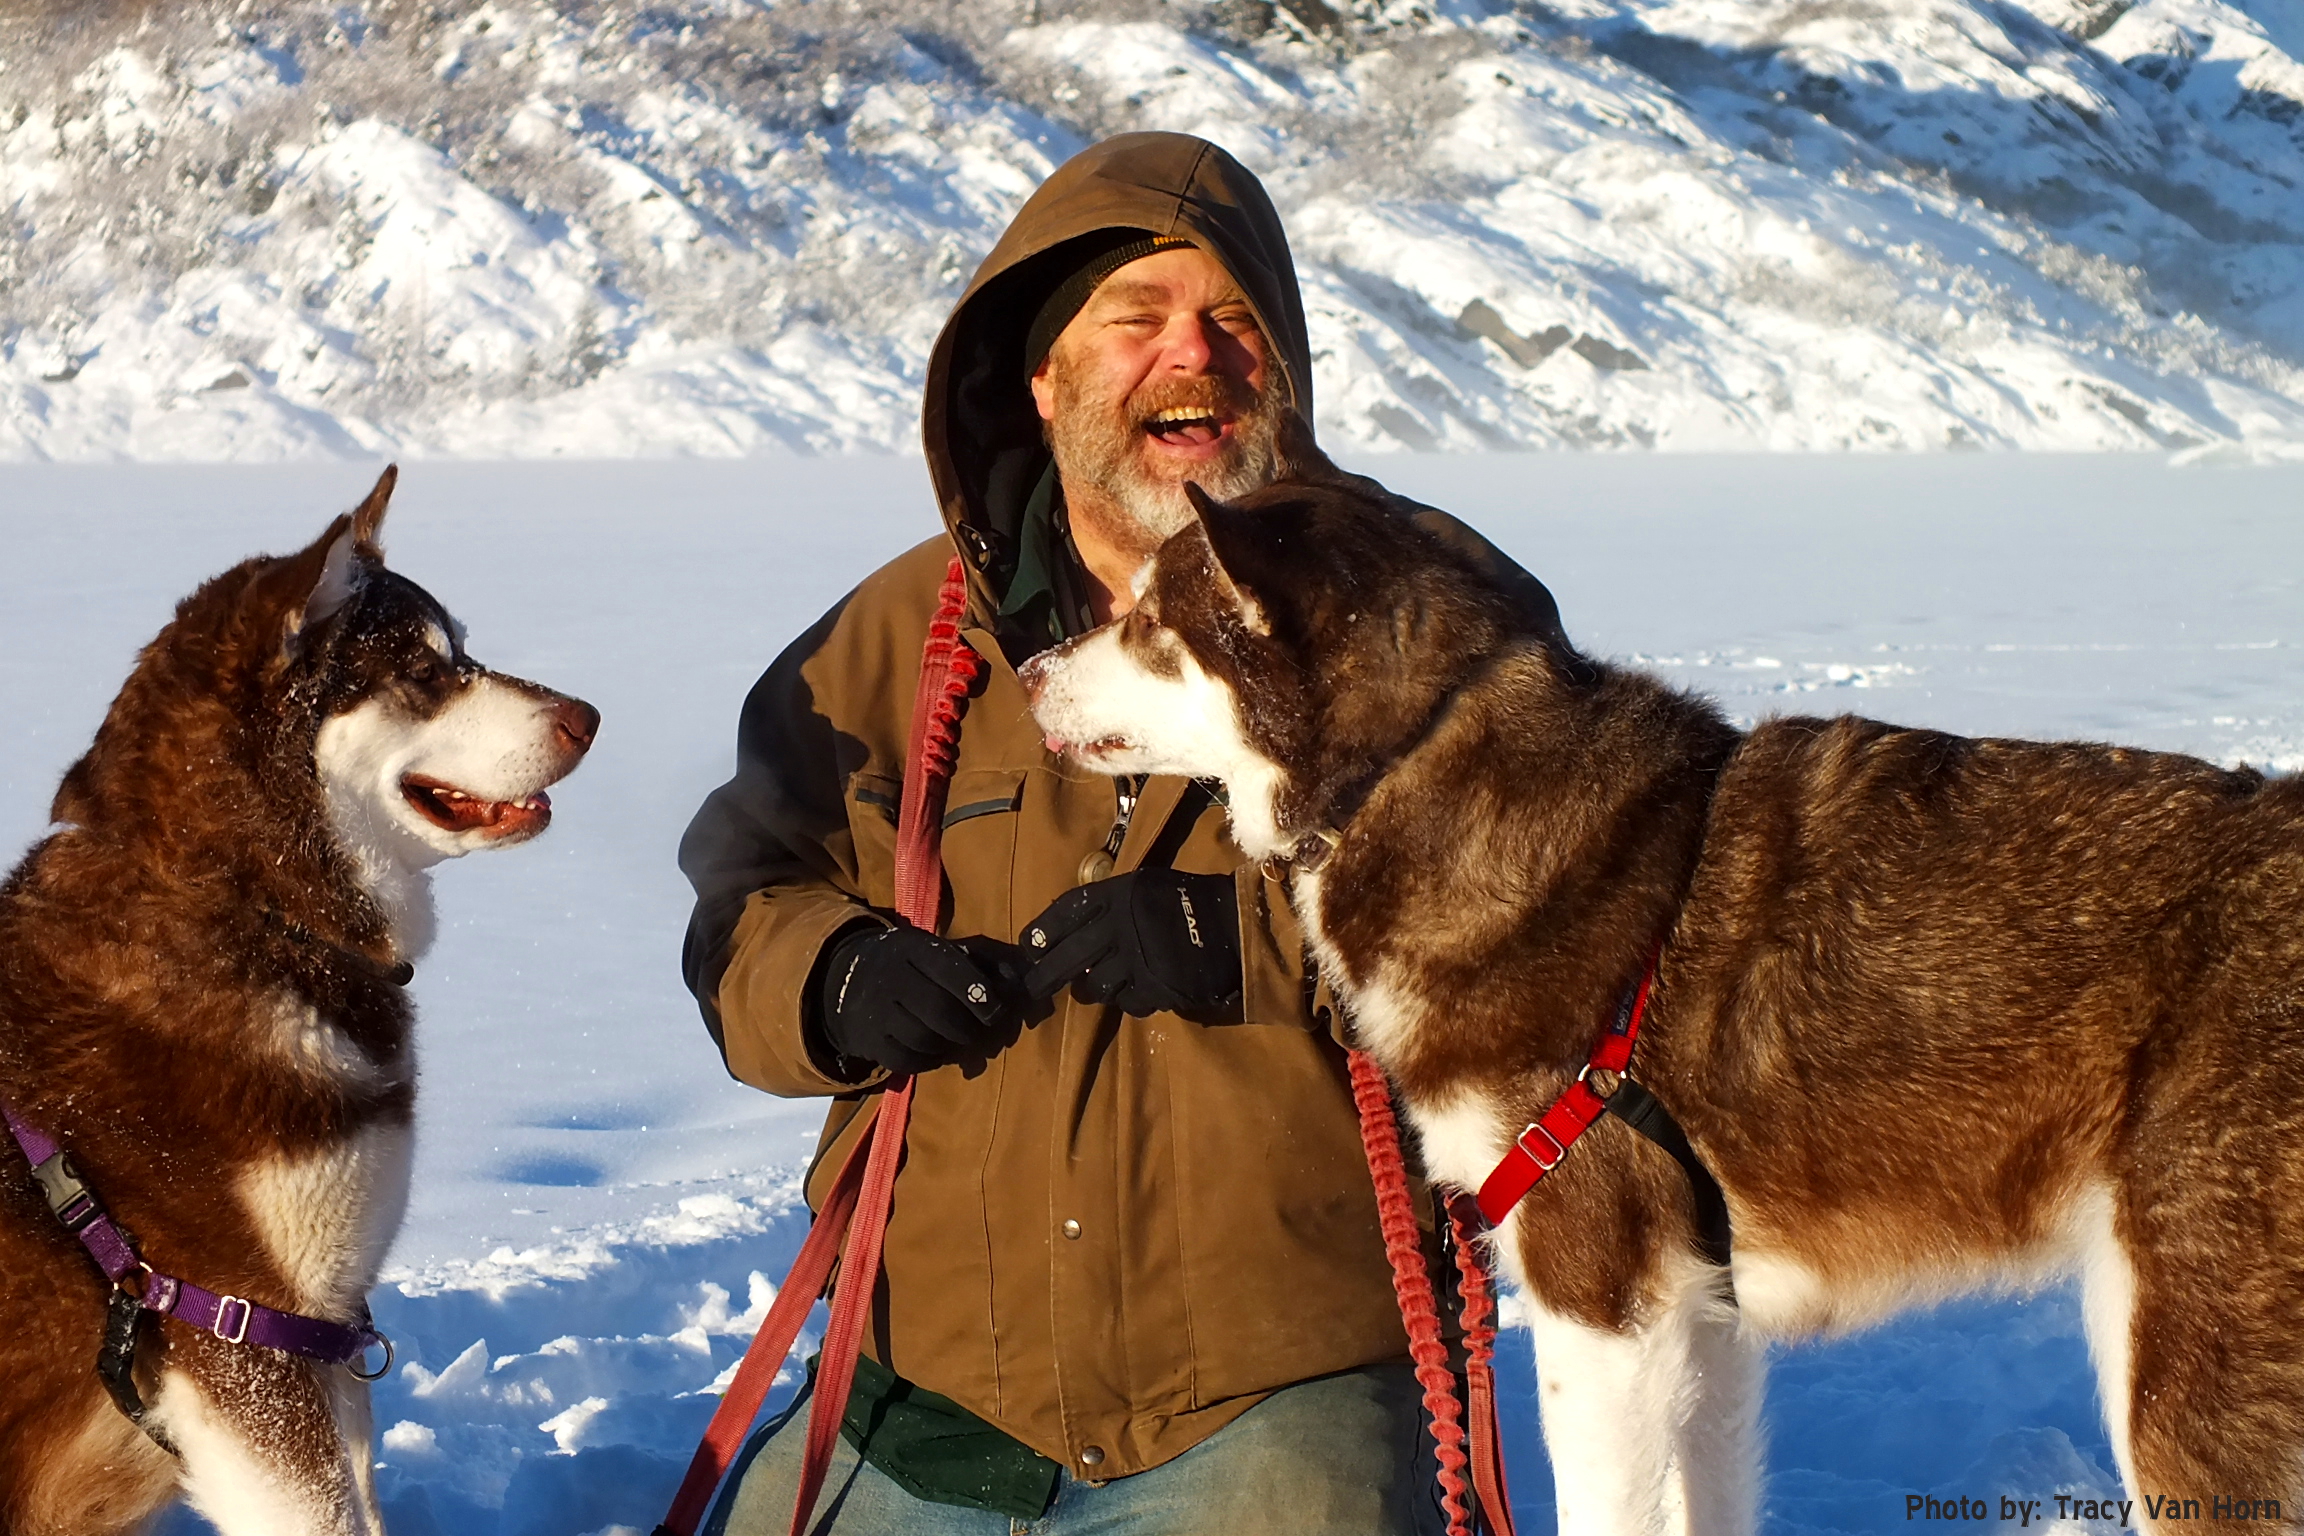 The Two that Make 3 with Me - In Love. Mendenhall Glacier Juneau Alaska. From Puppy Mill to the big screen an Alaskan Cinderella Story: Skadi & Freya ~ Thank you for your Kindness and Support (PLEASE CLICK LIKE!)